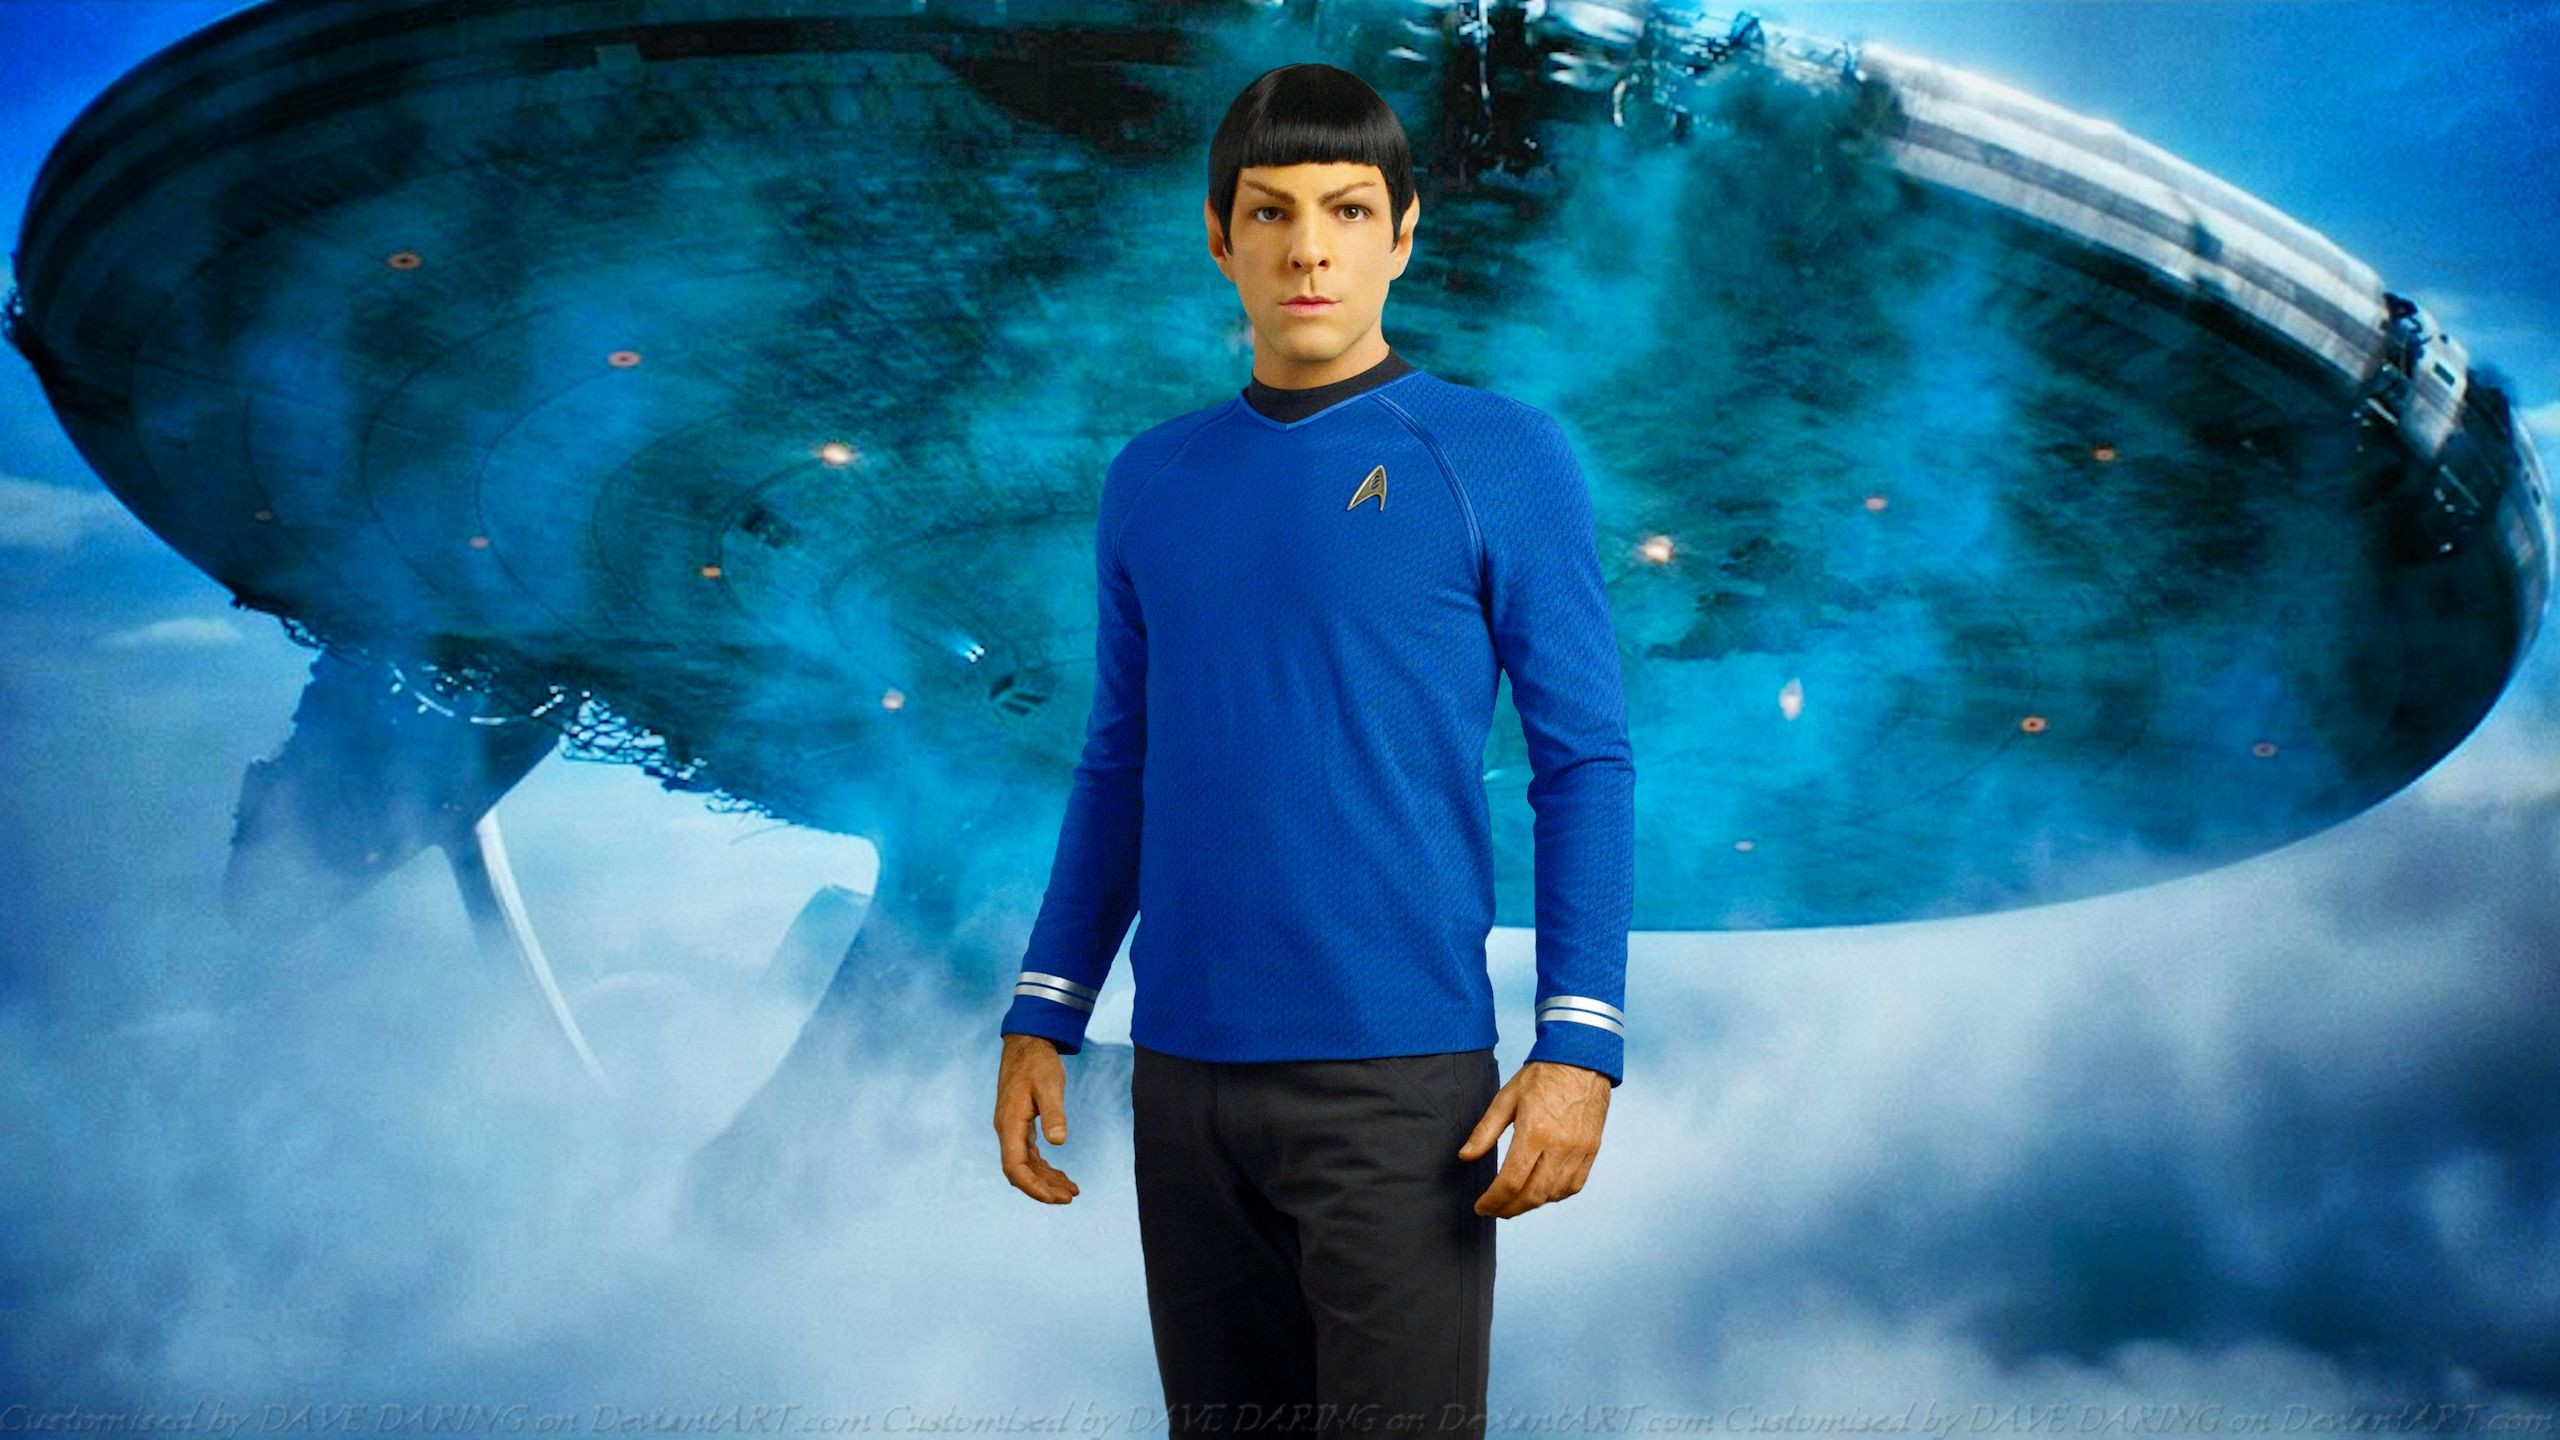 2560x1440 ... Zachary Quinto Spock IV by Dave-Daring